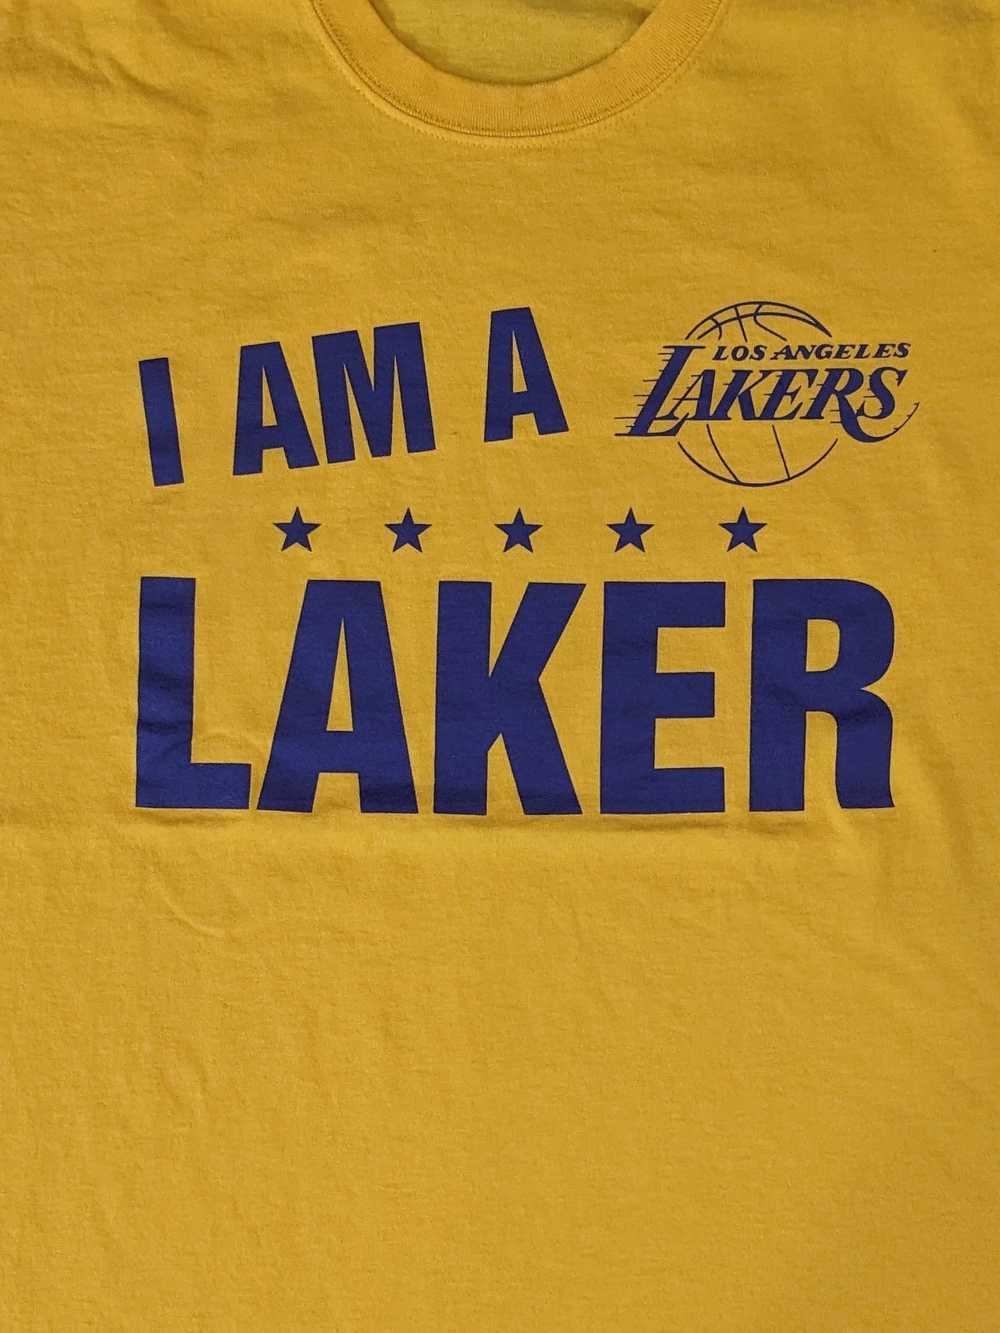 L.A. Lakers × Lakers × NBA I Am a Laker - We Are … - image 2